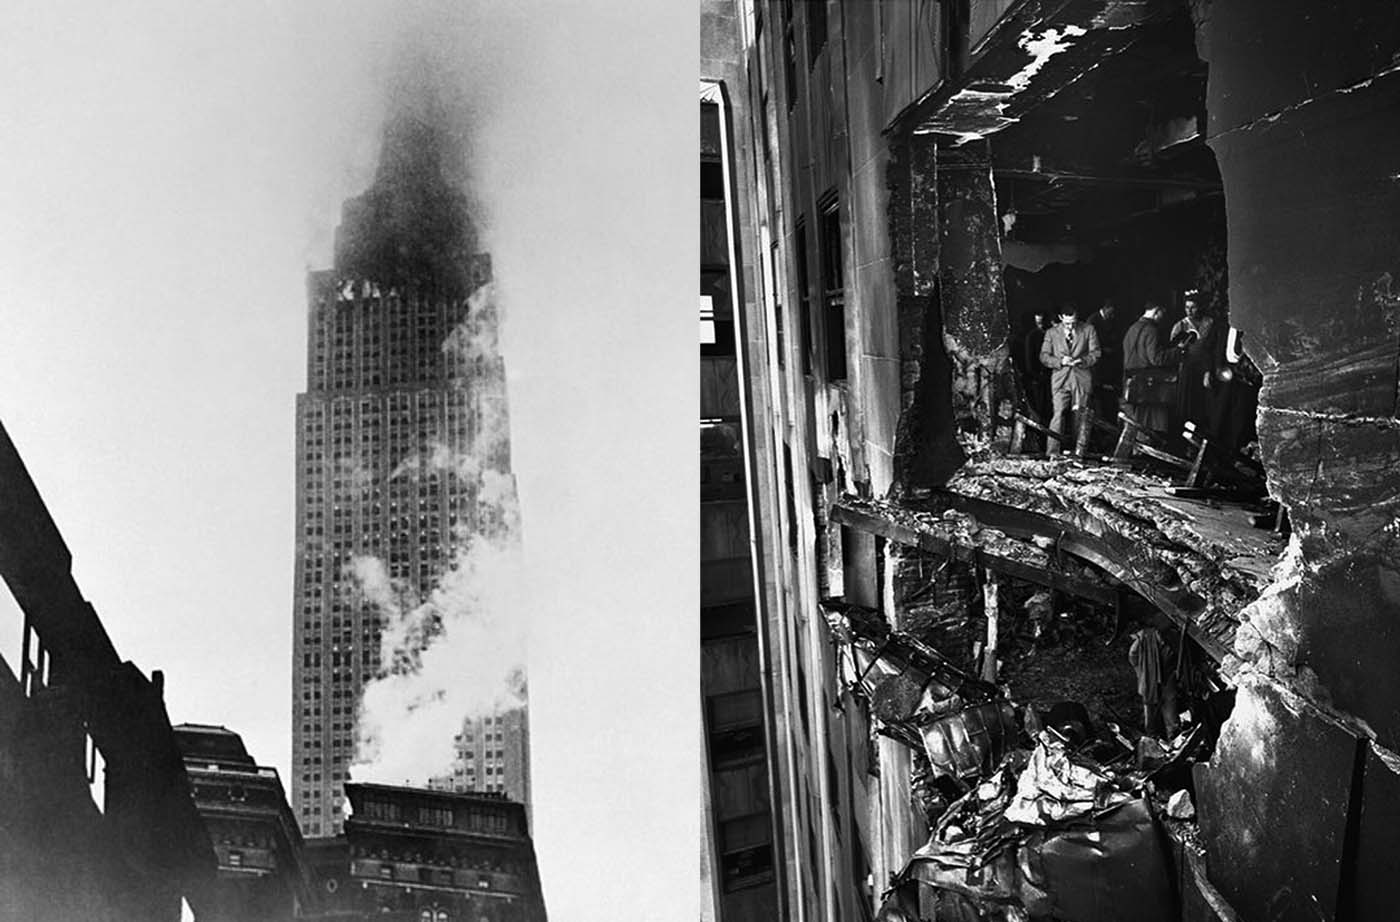 The day when a B-25 Mitchell bomber crashed into the Empire State Building in New York City, 1945